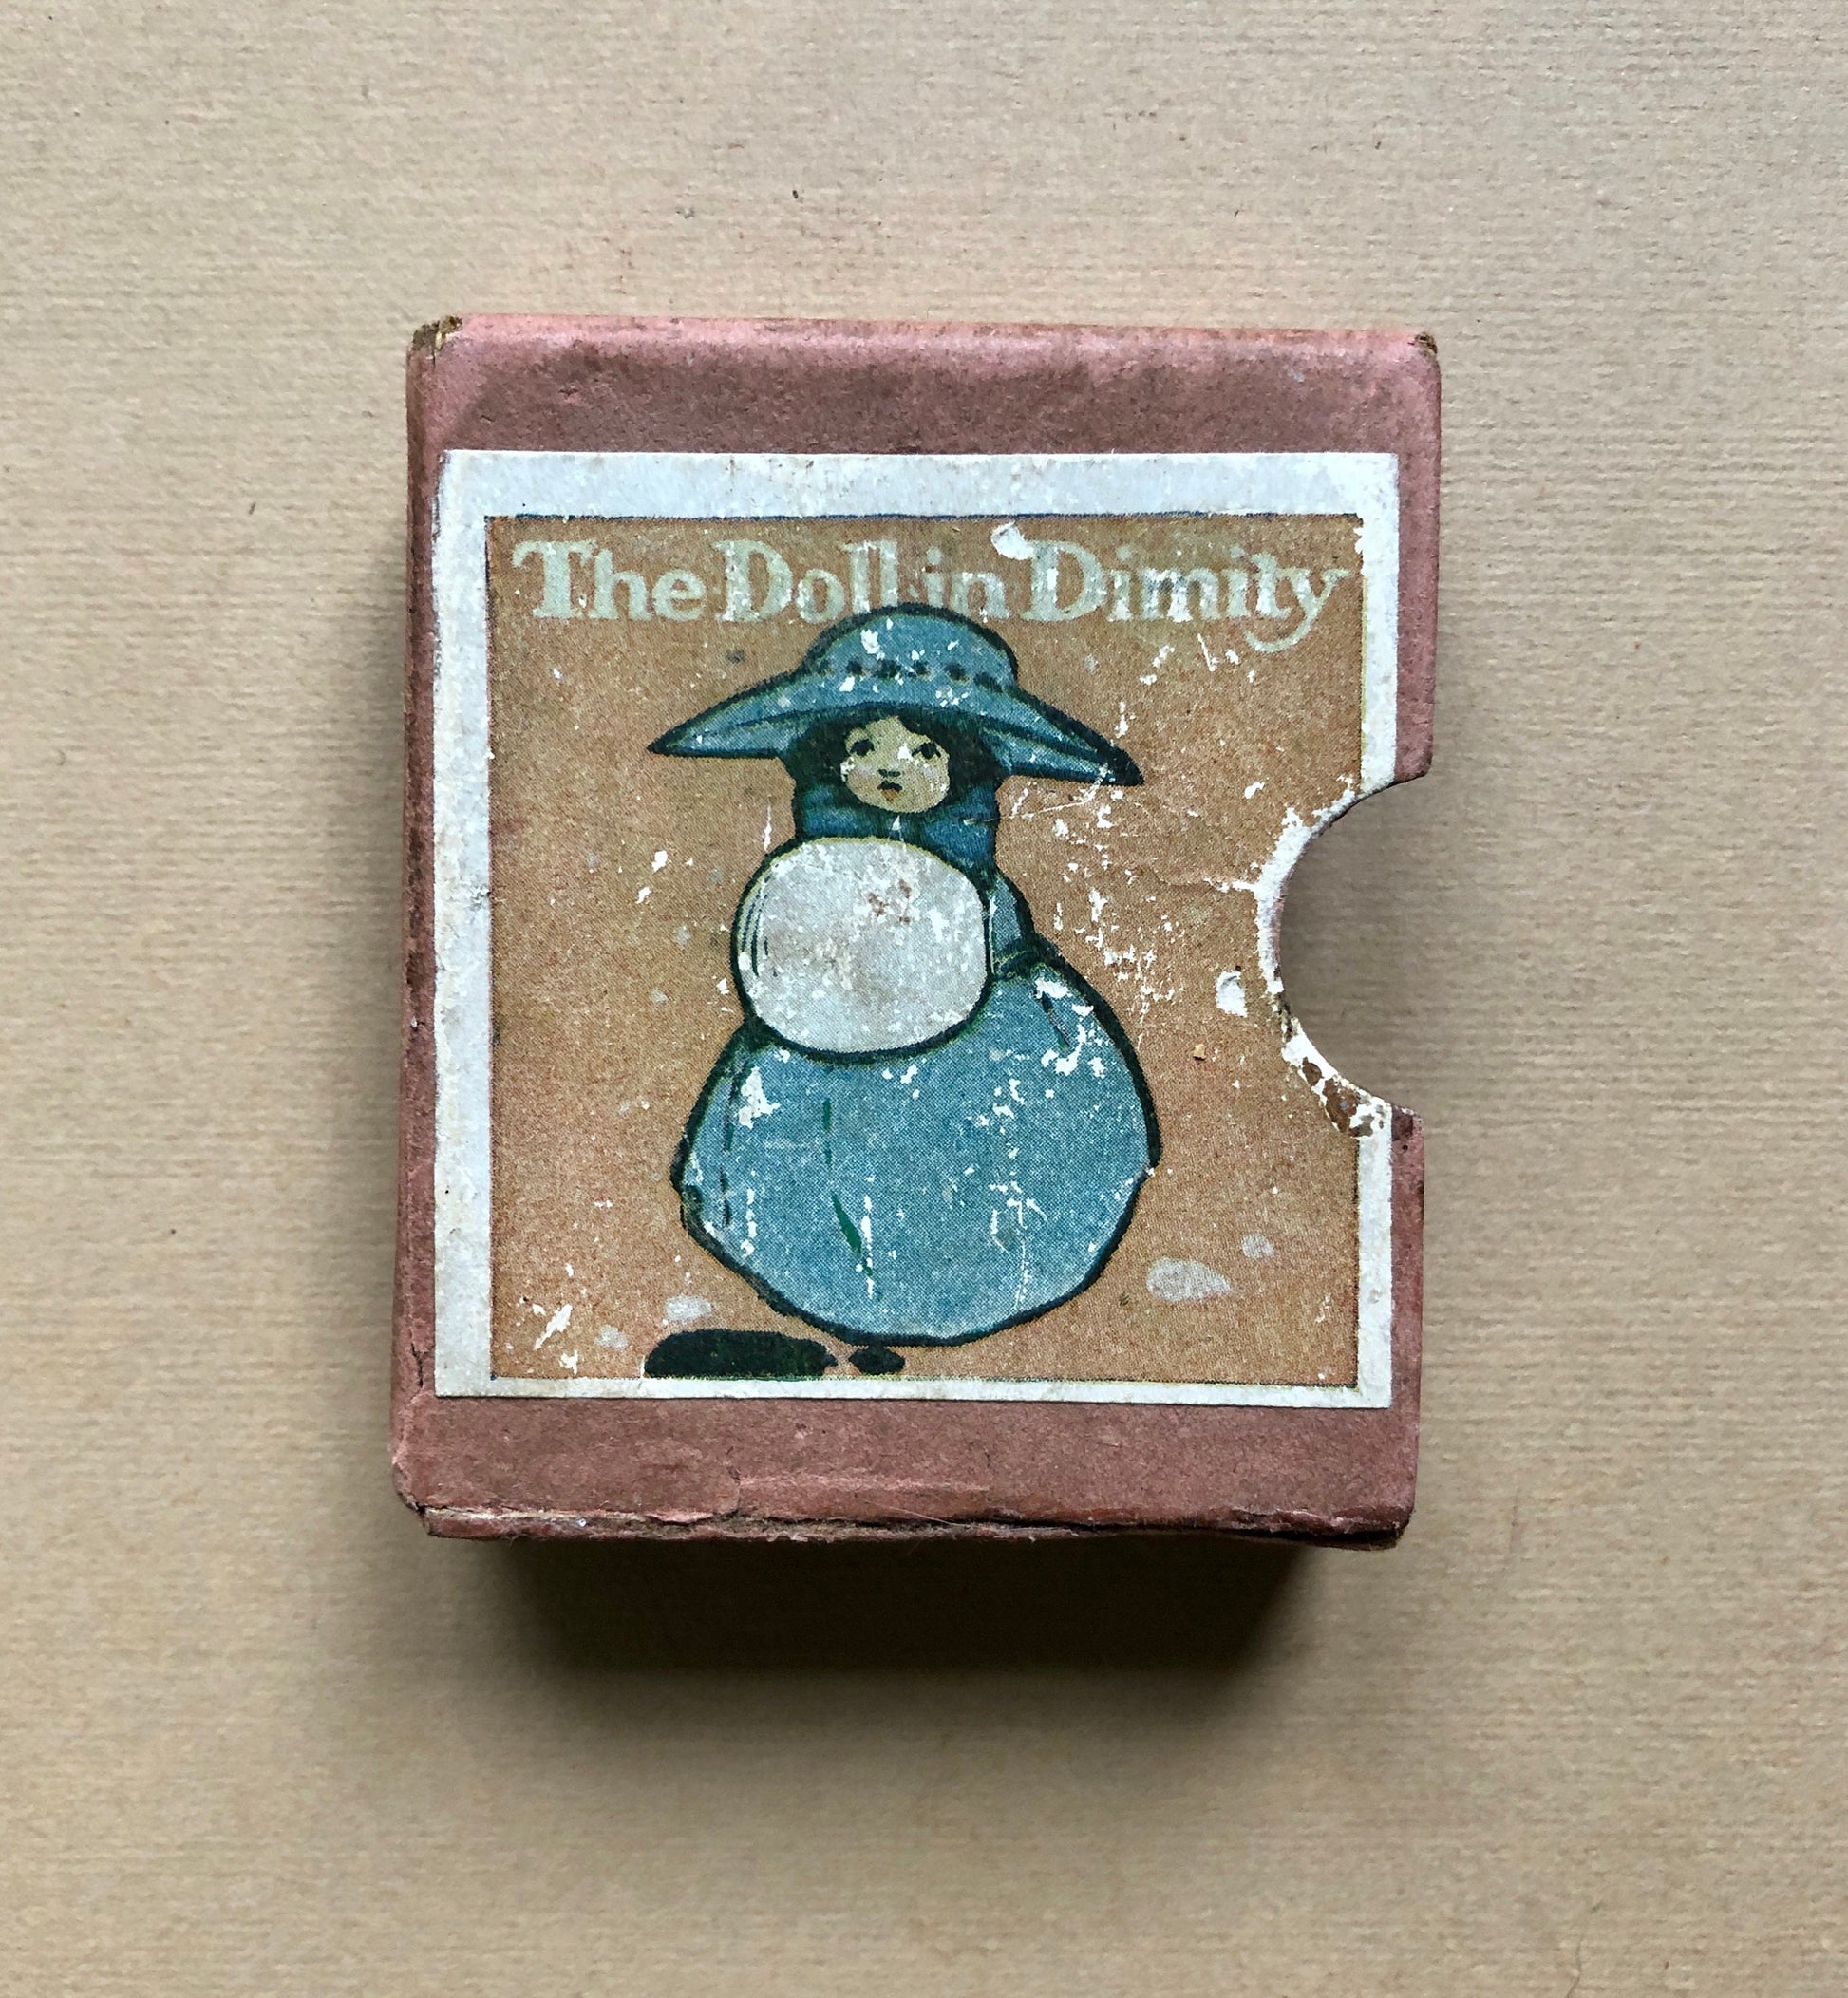 The Doll in Dimity. A Tiny Book in a Slipcase. Published by Humphrey Milford. Undated but known to be 1910. 64 Pages. Size: 6 x 5.5 cms.